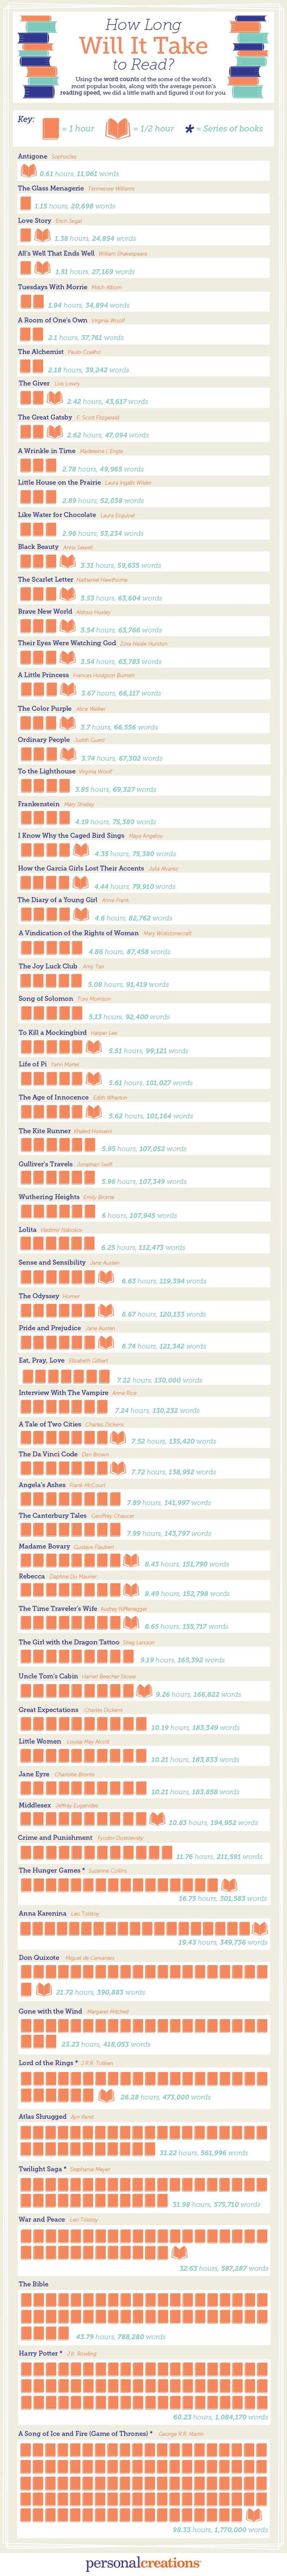 How Long Does It Take To Read Popular Books